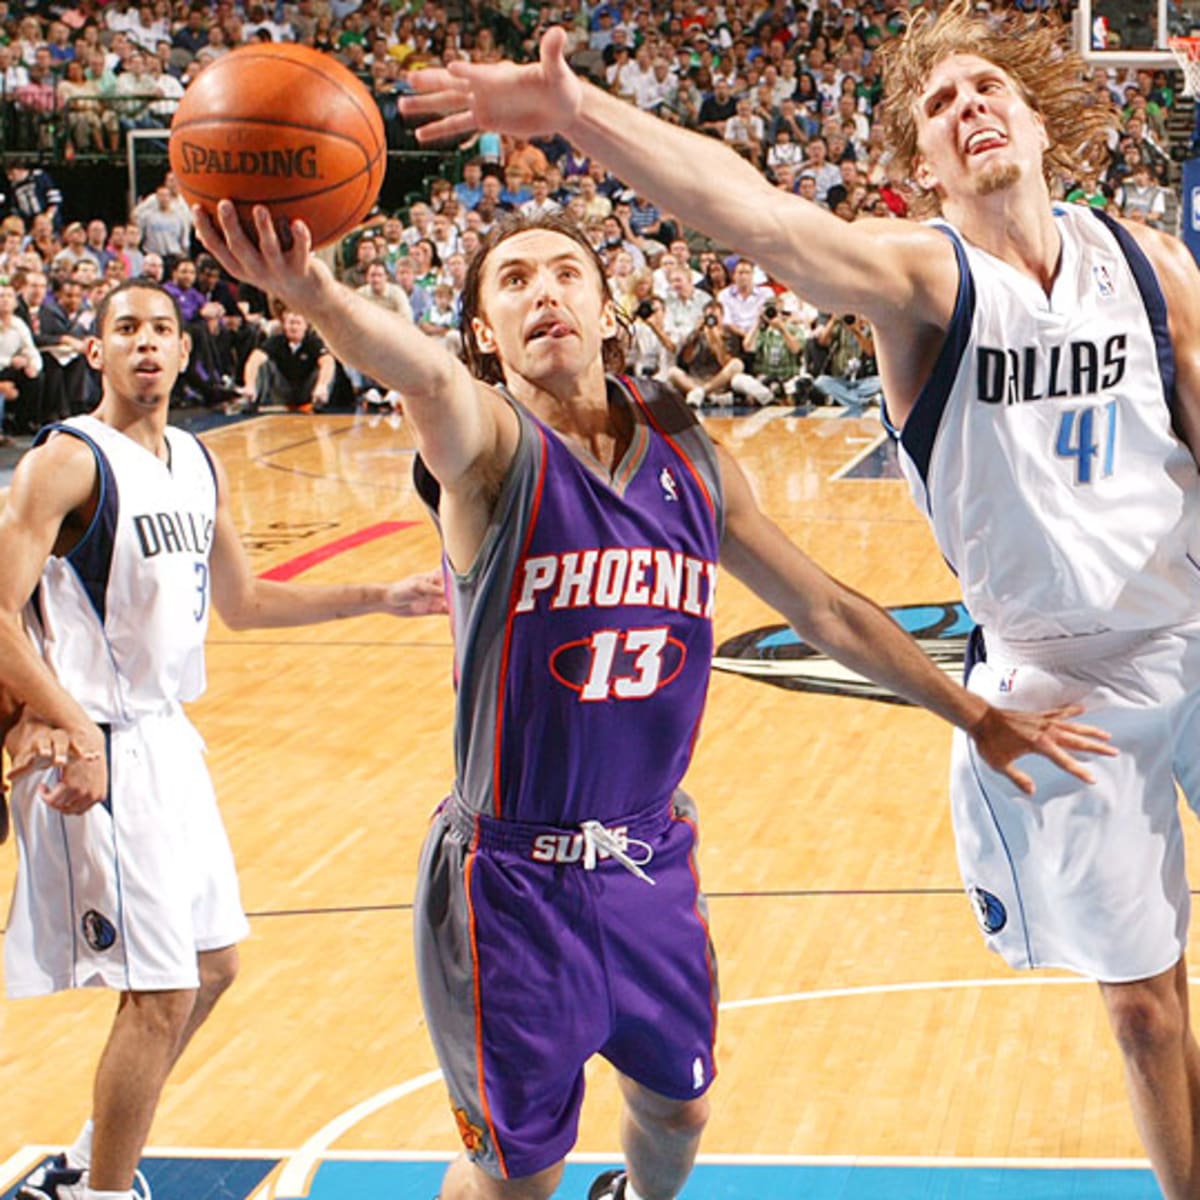 Phoenix Suns Steve Nash wears the Los Suns jersey which is indicative of  the immigration controversy in Arizona during the first quarter of Game 2  of the second round of the NBA